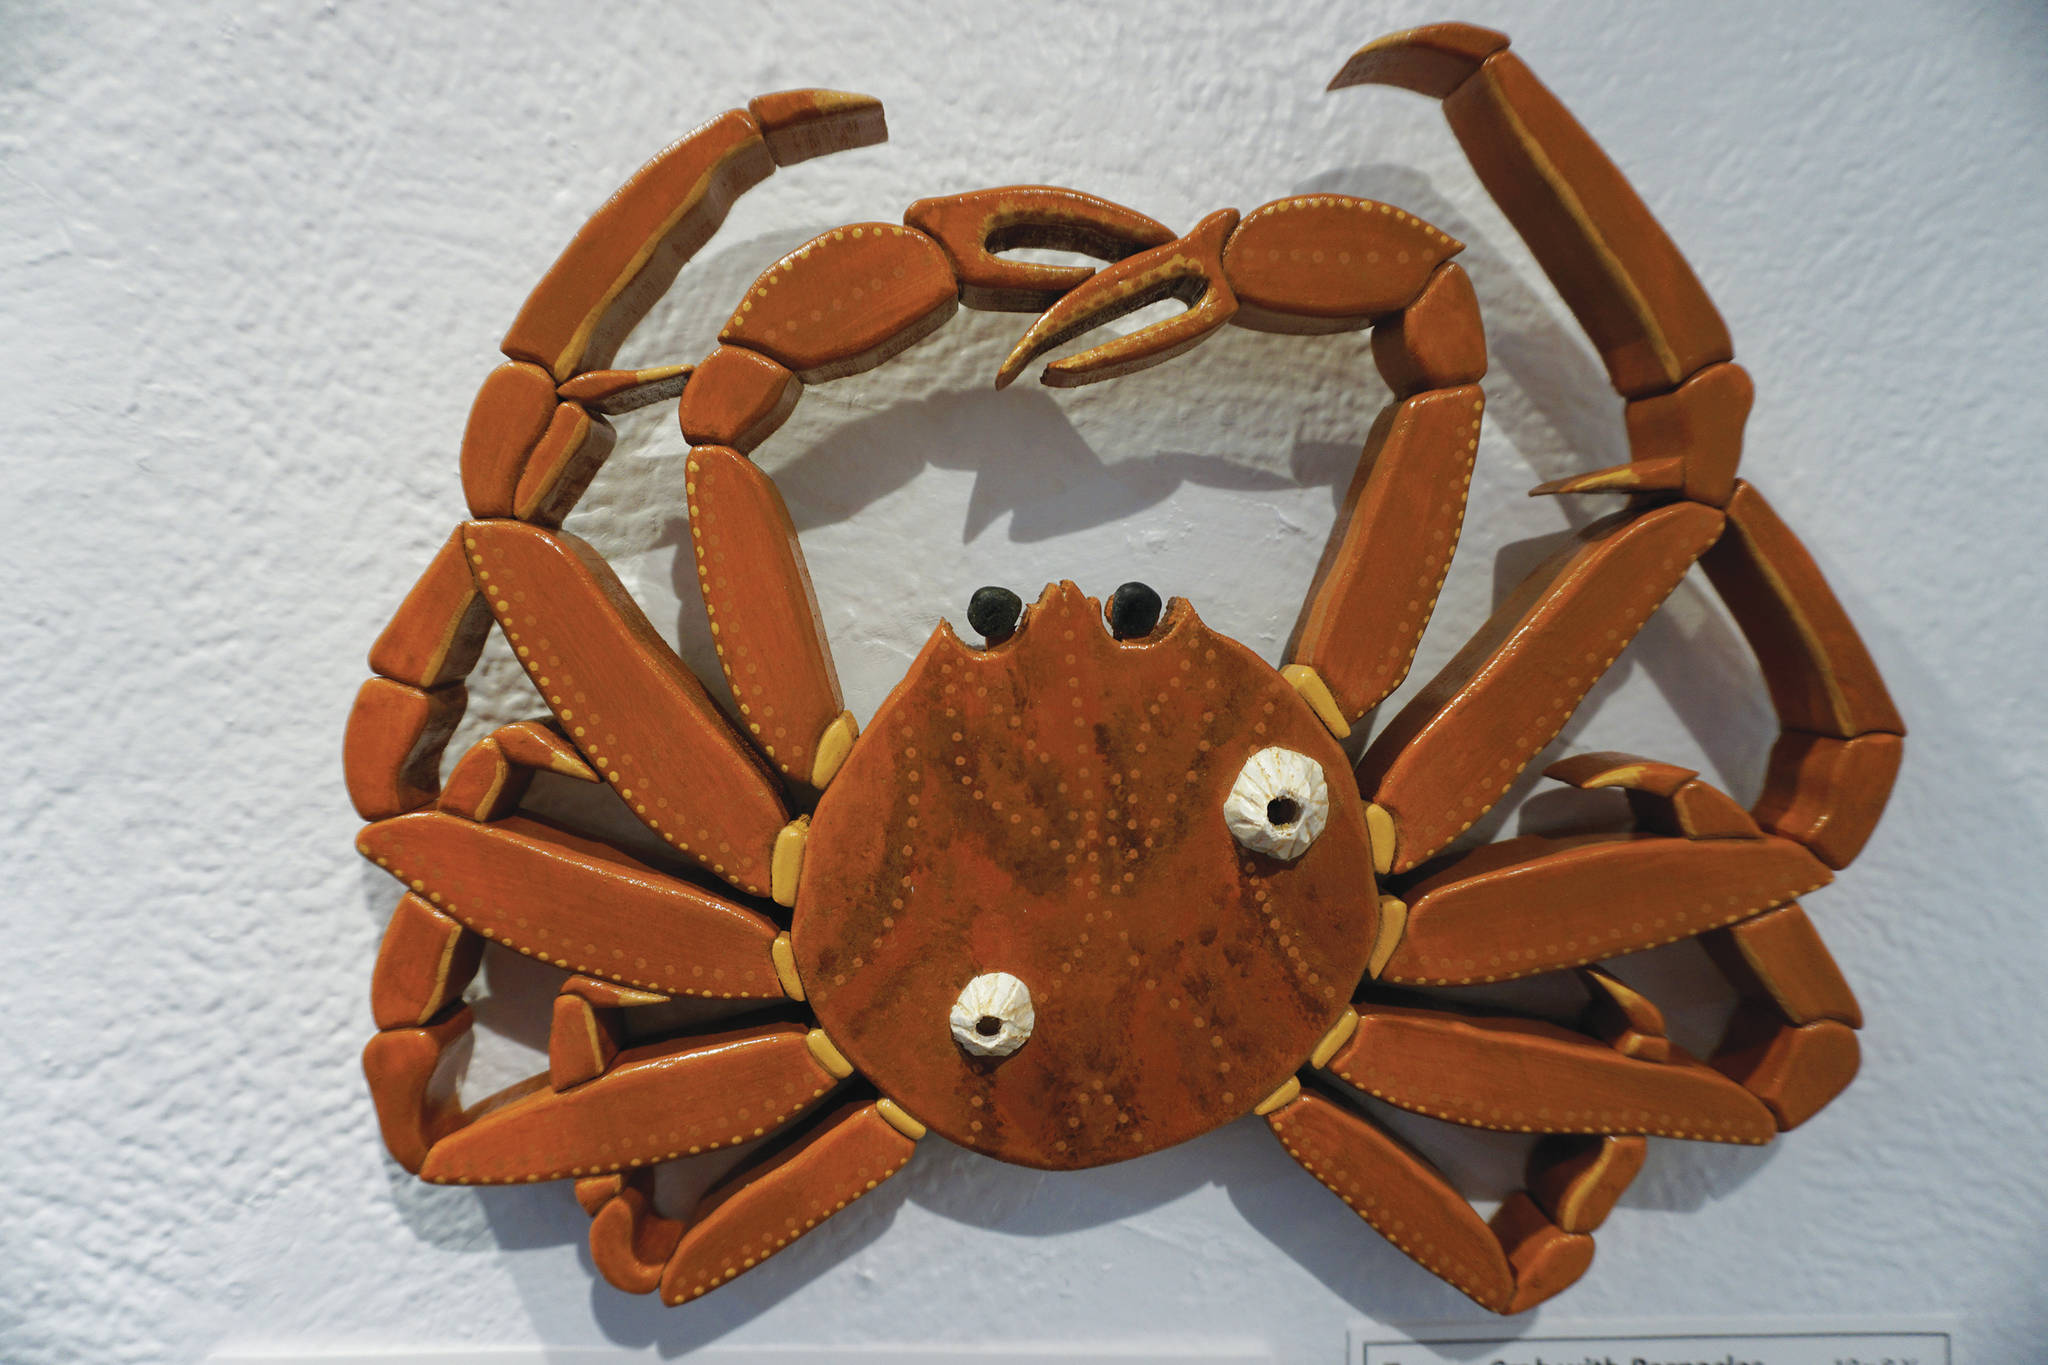 "Tanner Crab with Barnacles" is one of the wood sculptural pieces in Kim Schuster’s exhibit, “Science Observed Through Art: Unsung Species,” as seen here on Friday, Dec. 4, 2020, at Ptarmigan Arts in Homer, Alaska. (Photo by Michael Armstrong/Homer News)